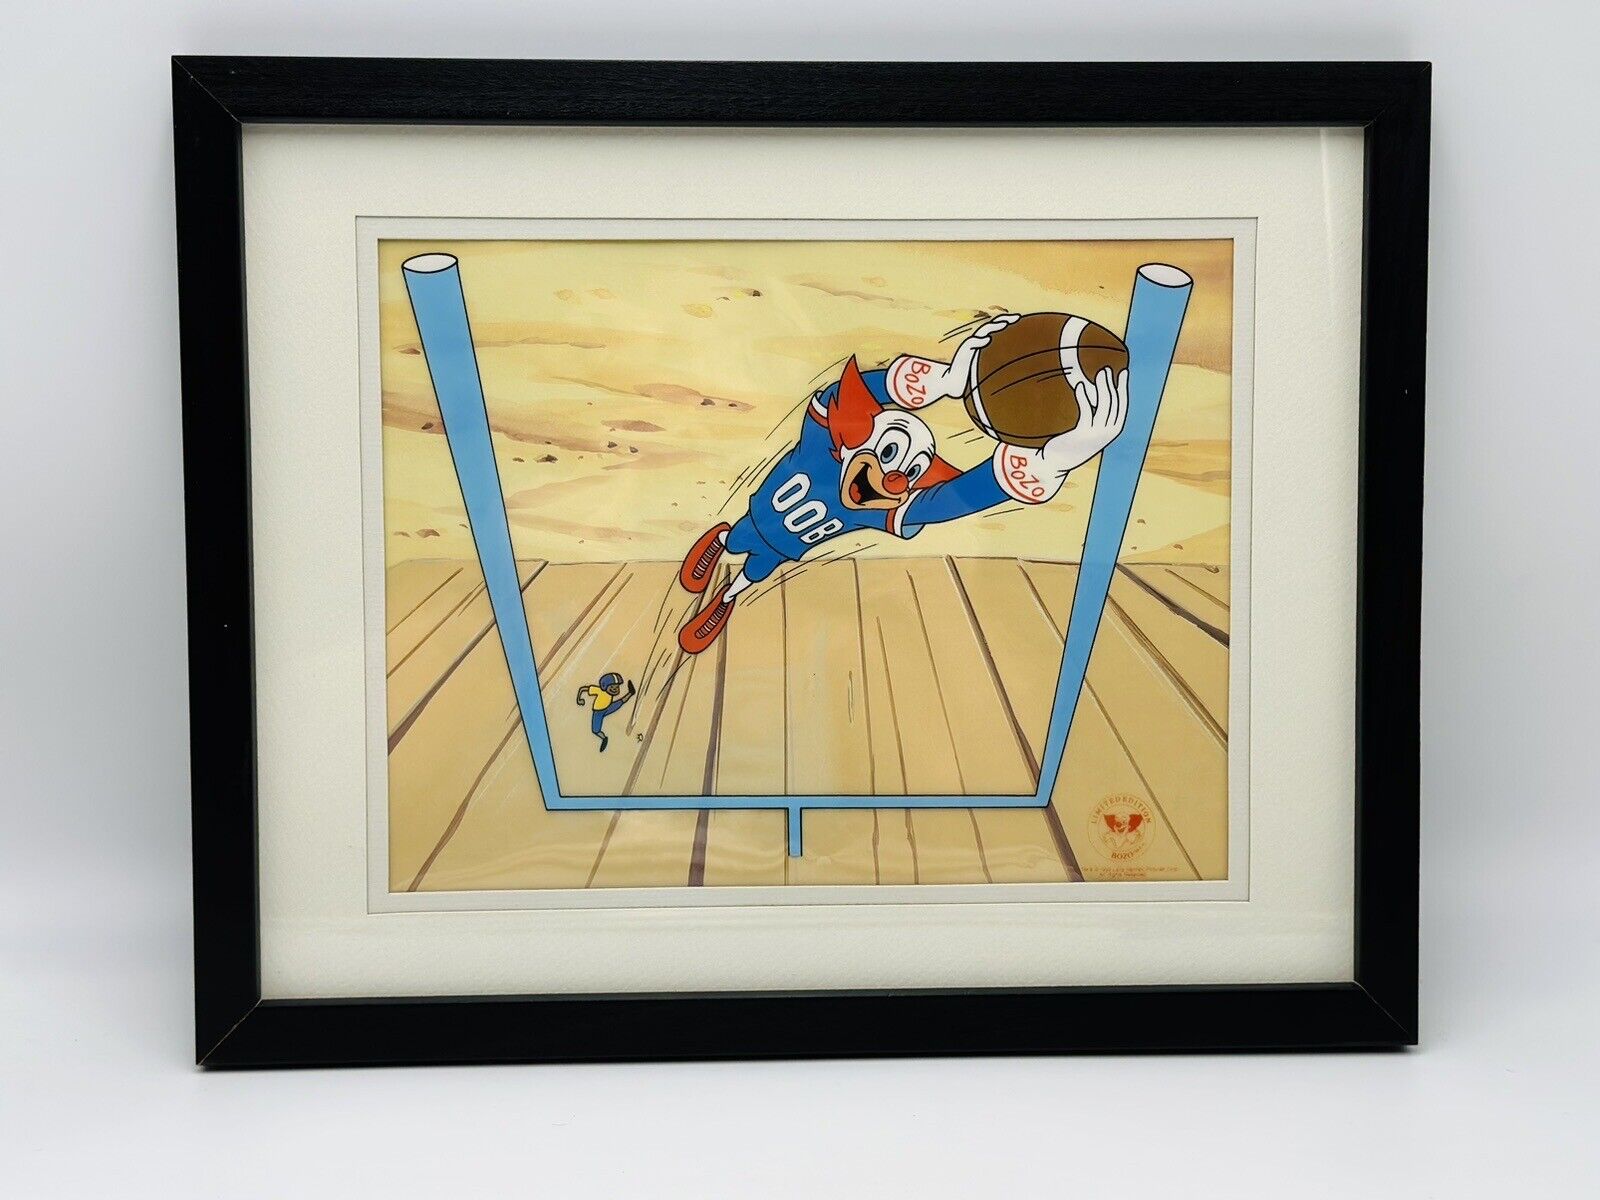 BOZO THE CLOWN Playing FOOTBALL LE 15x12” Serigraph Cel Framed Picture